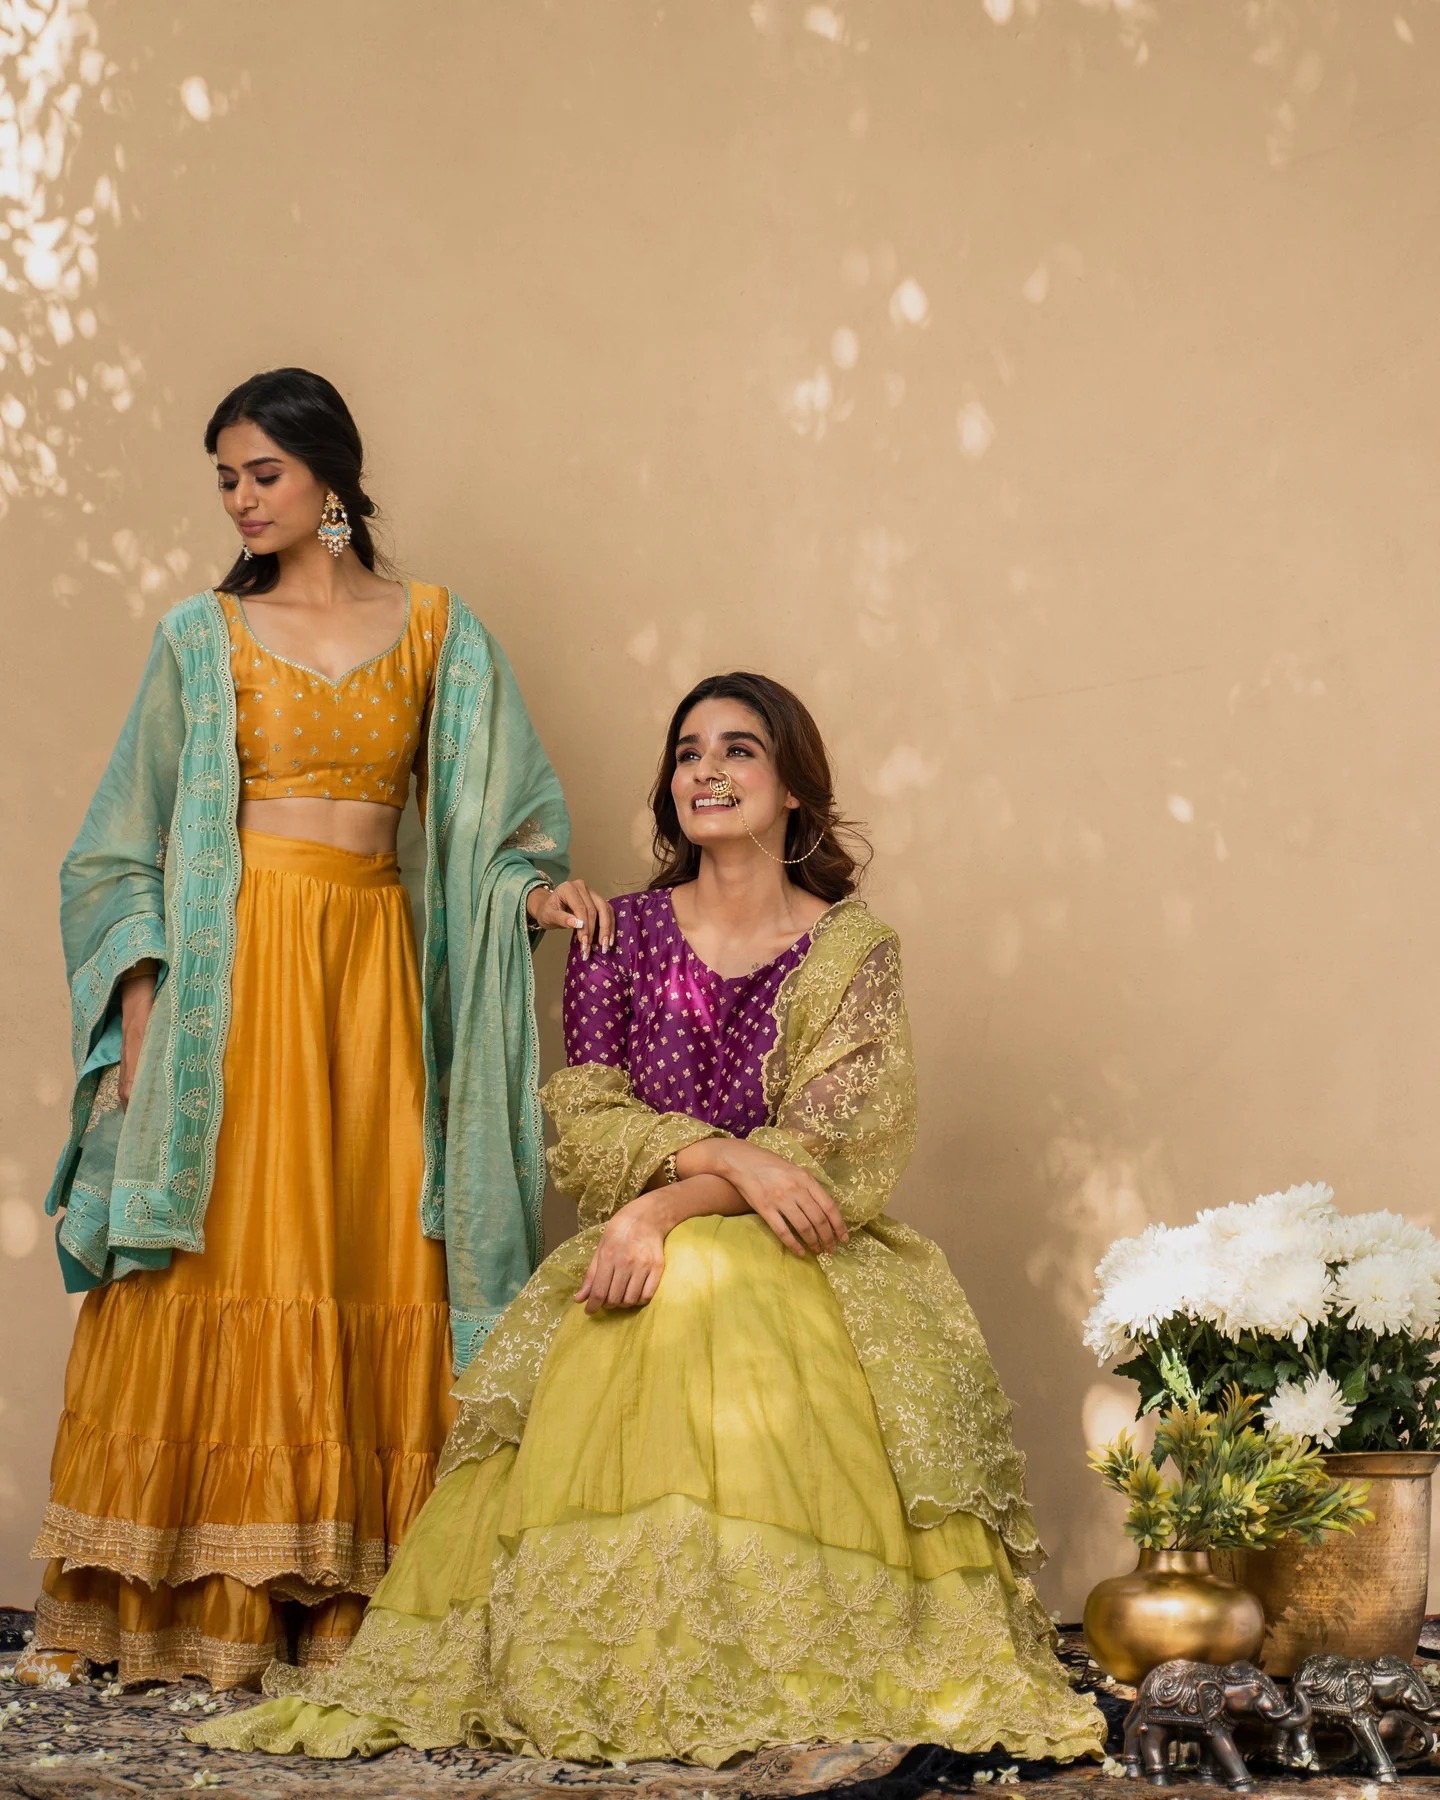 Top Budget-Friendly Brands To Check Out For Bridesmaids' Outfits